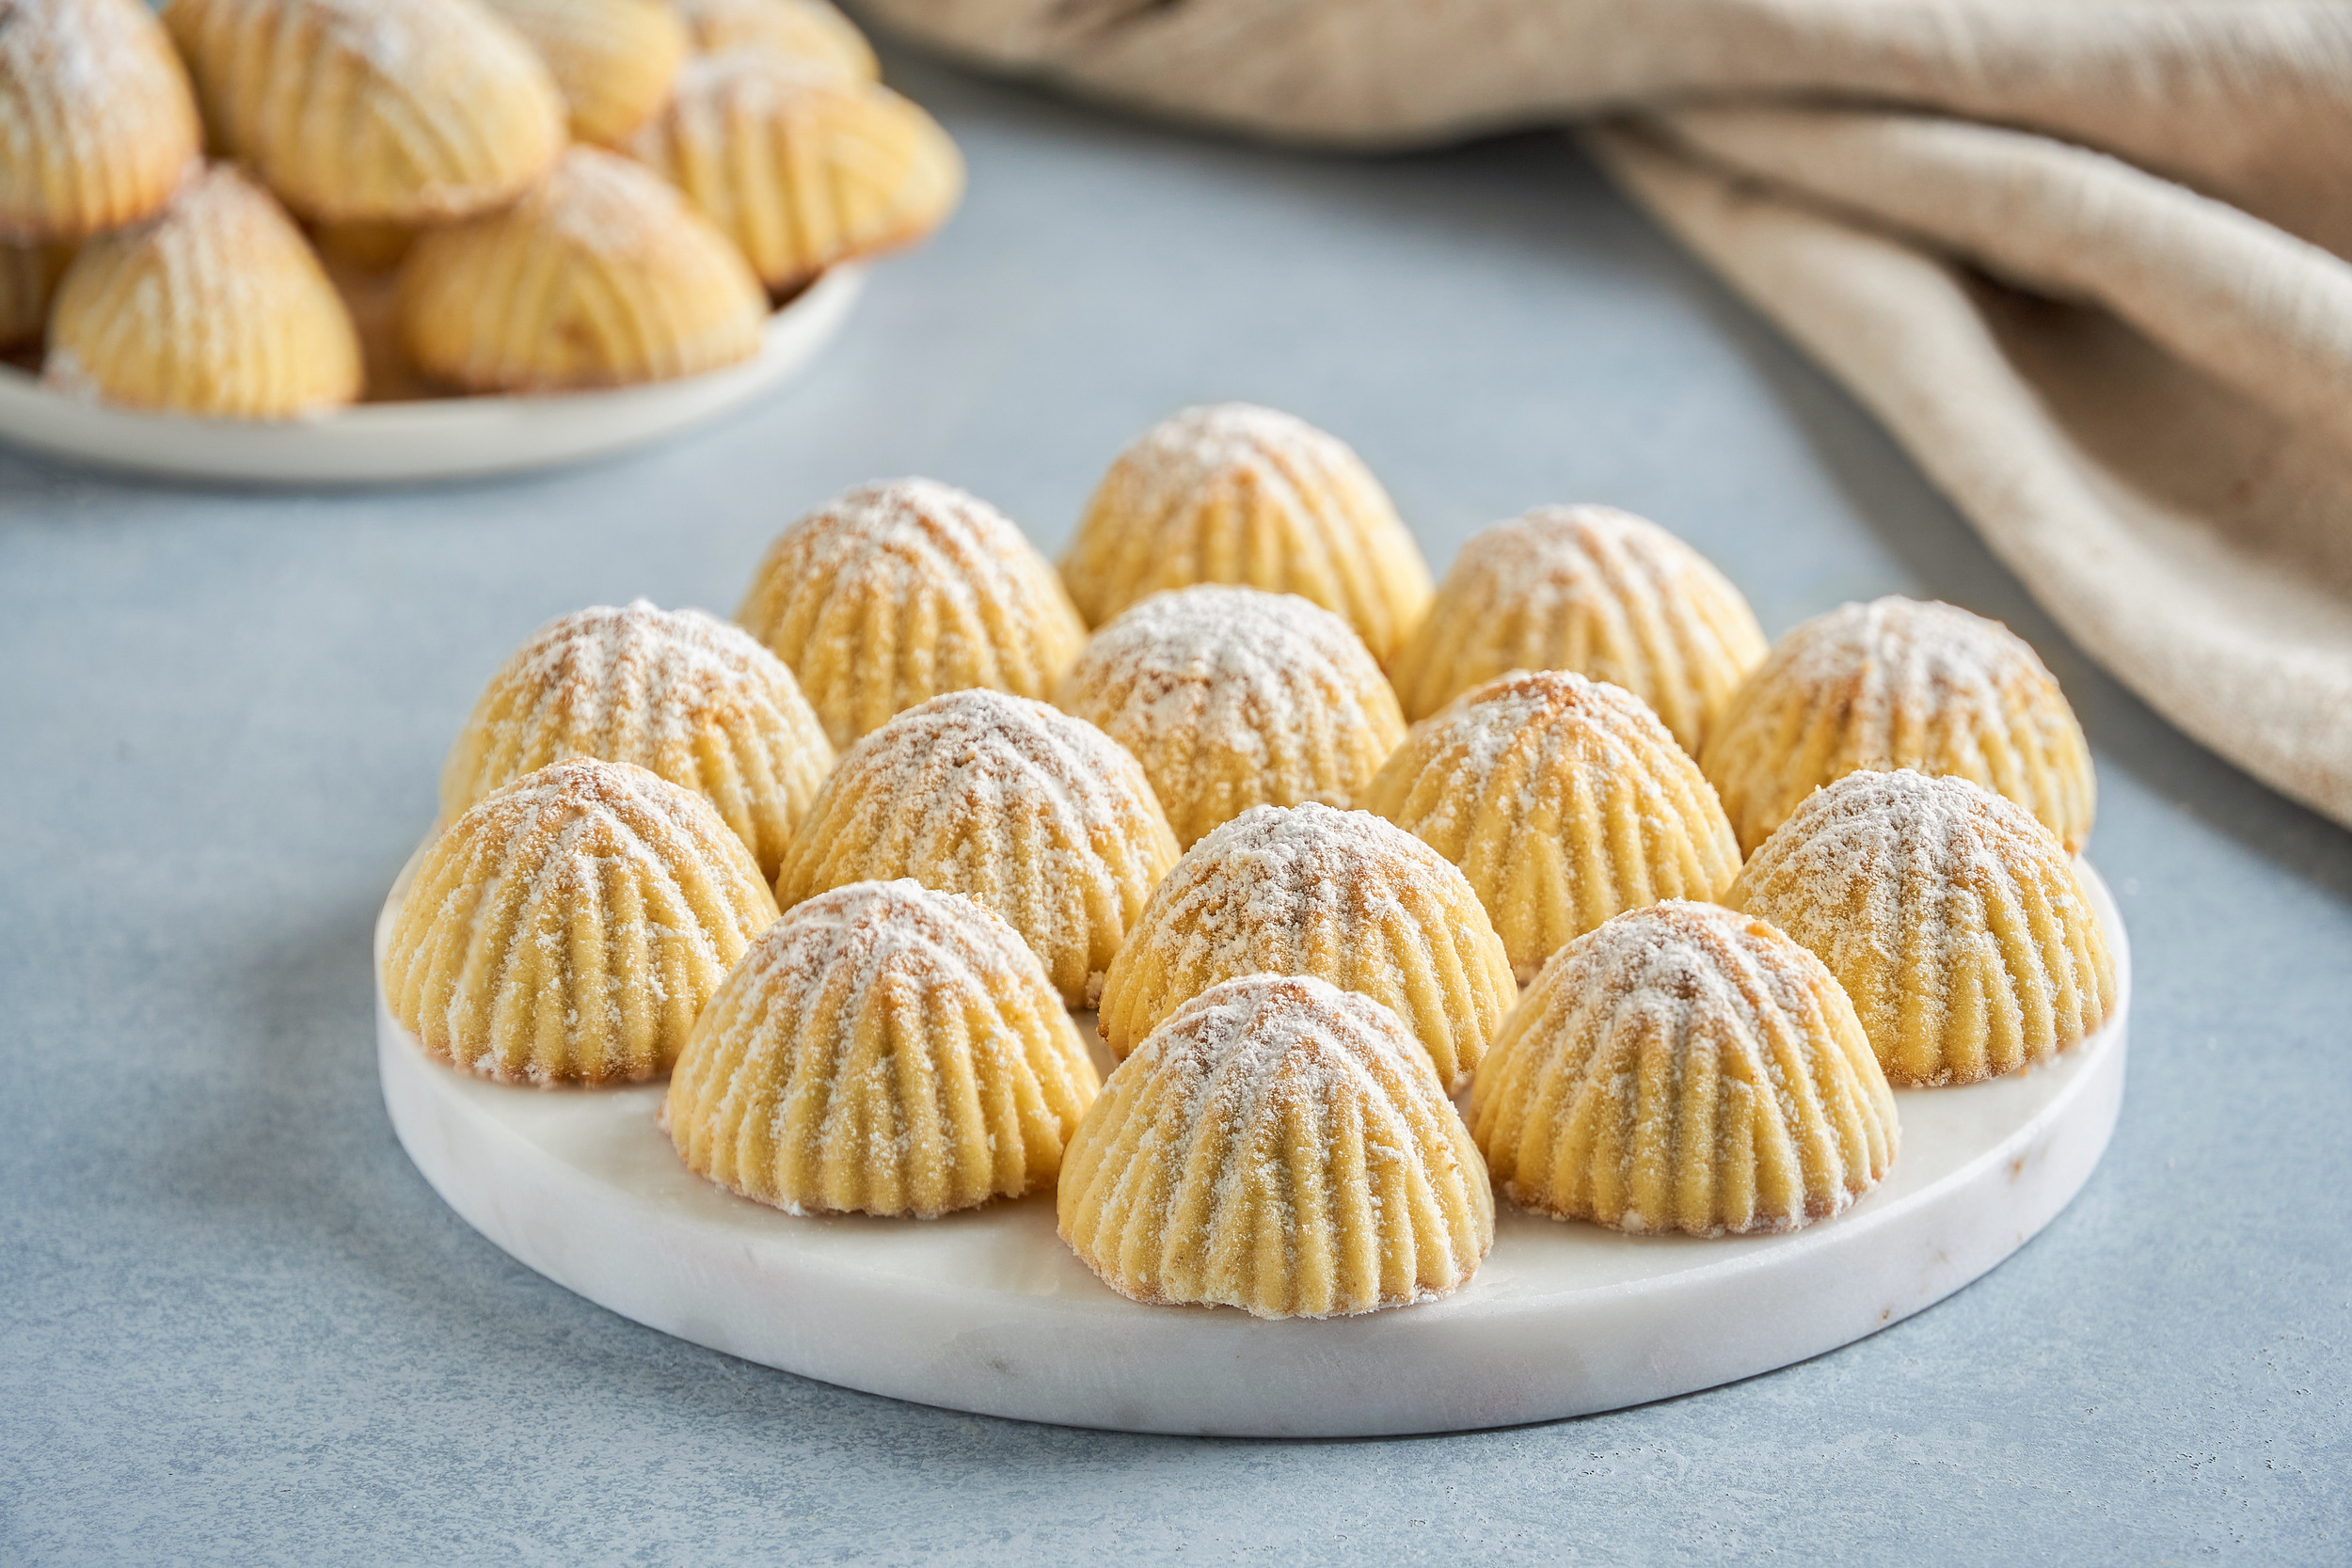 <p><em>Ma’amoul</em>, or <em>maamoul</em>, are butter cookies stuffed with nuts and/or dates. These treats hail from the Arabian Peninsula and are especially popular around Easter, Purim, and Eid, as well the winter holiday season. They look unassuming but are actually packed with flavor, as the dough also contains rose water or orange flower water. Get the details on this date dessert <a href="https://www.thedeliciouscrescent.com/maamoul-cookies/"><span>via The Delicious Crescent</span></a>.</p><p>You may also like: <a href='https://www.yardbarker.com/lifestyle/articles/20_purr_fect_gift_ideas_for_cat_lovers/s1__38269414'>20 purr-fect gift ideas for cat lovers</a></p>